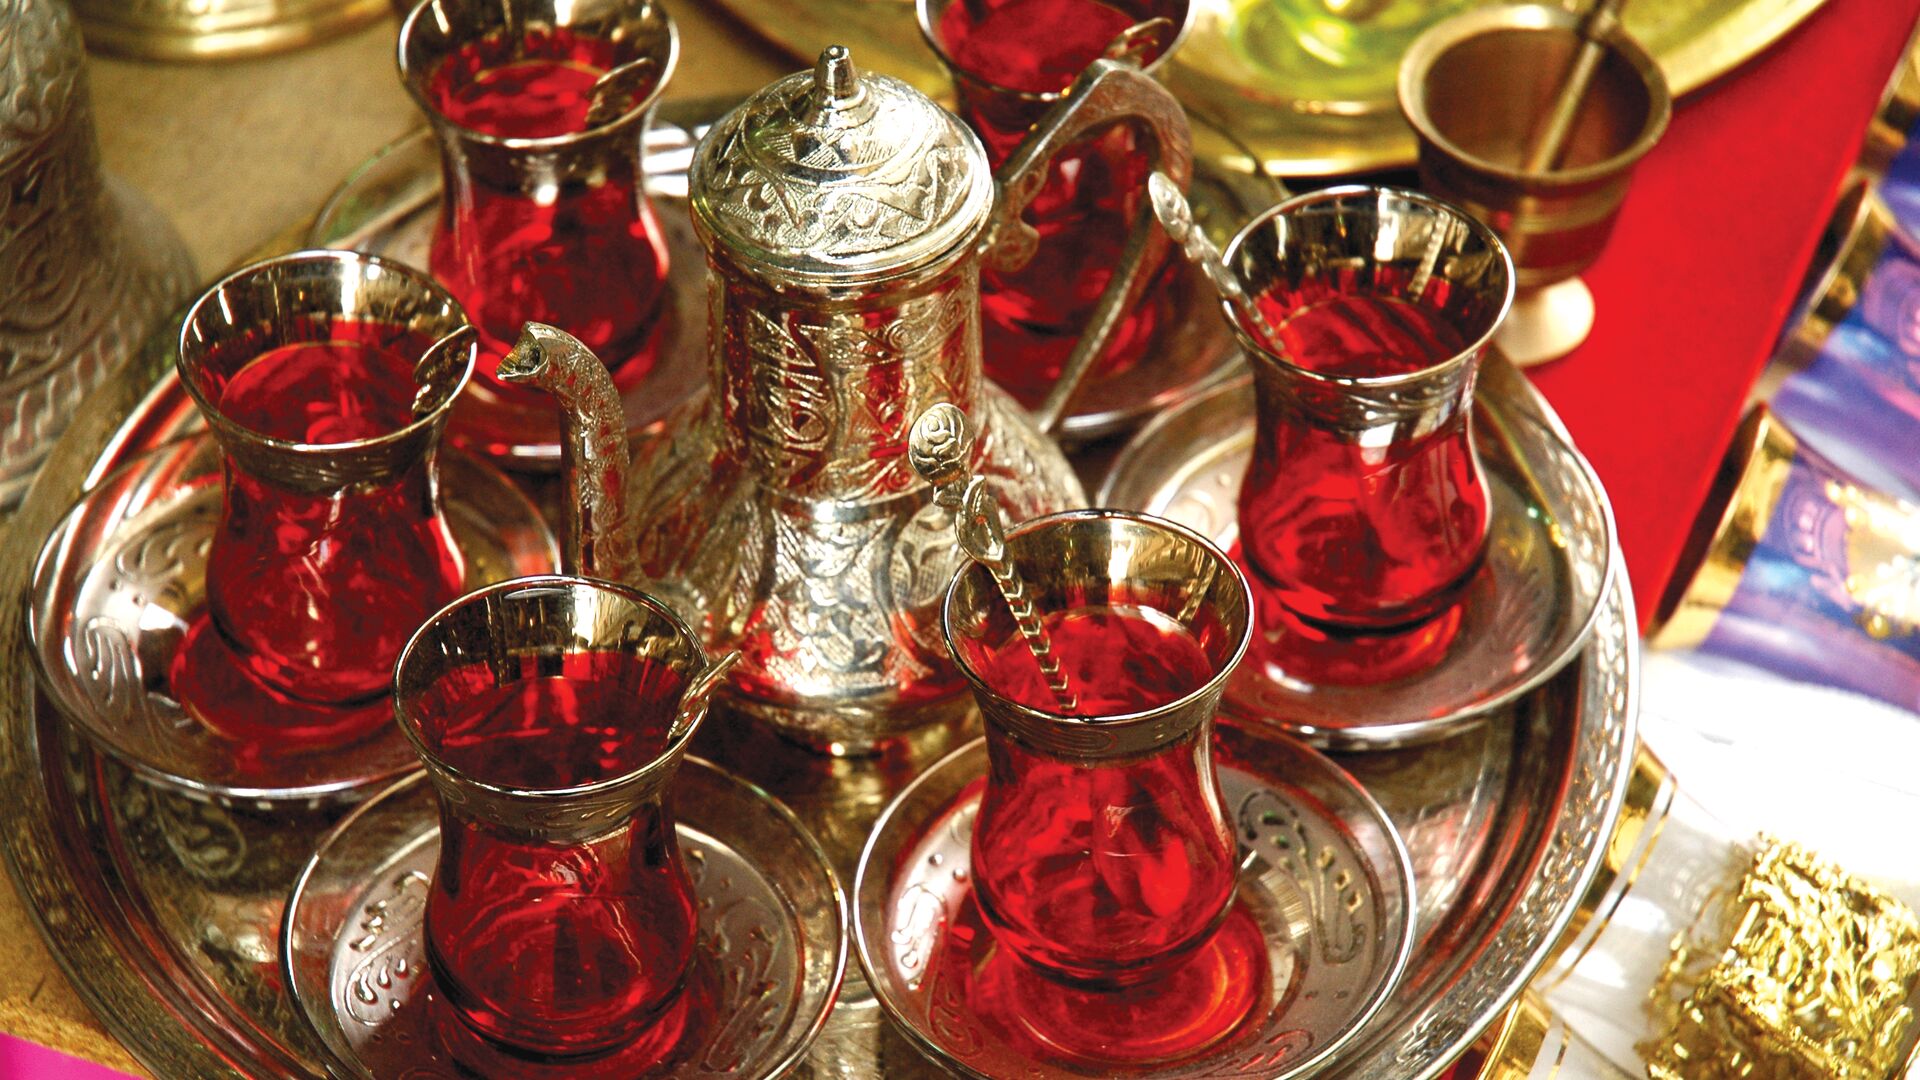 A tray of traditional çay, or Turkish tea 